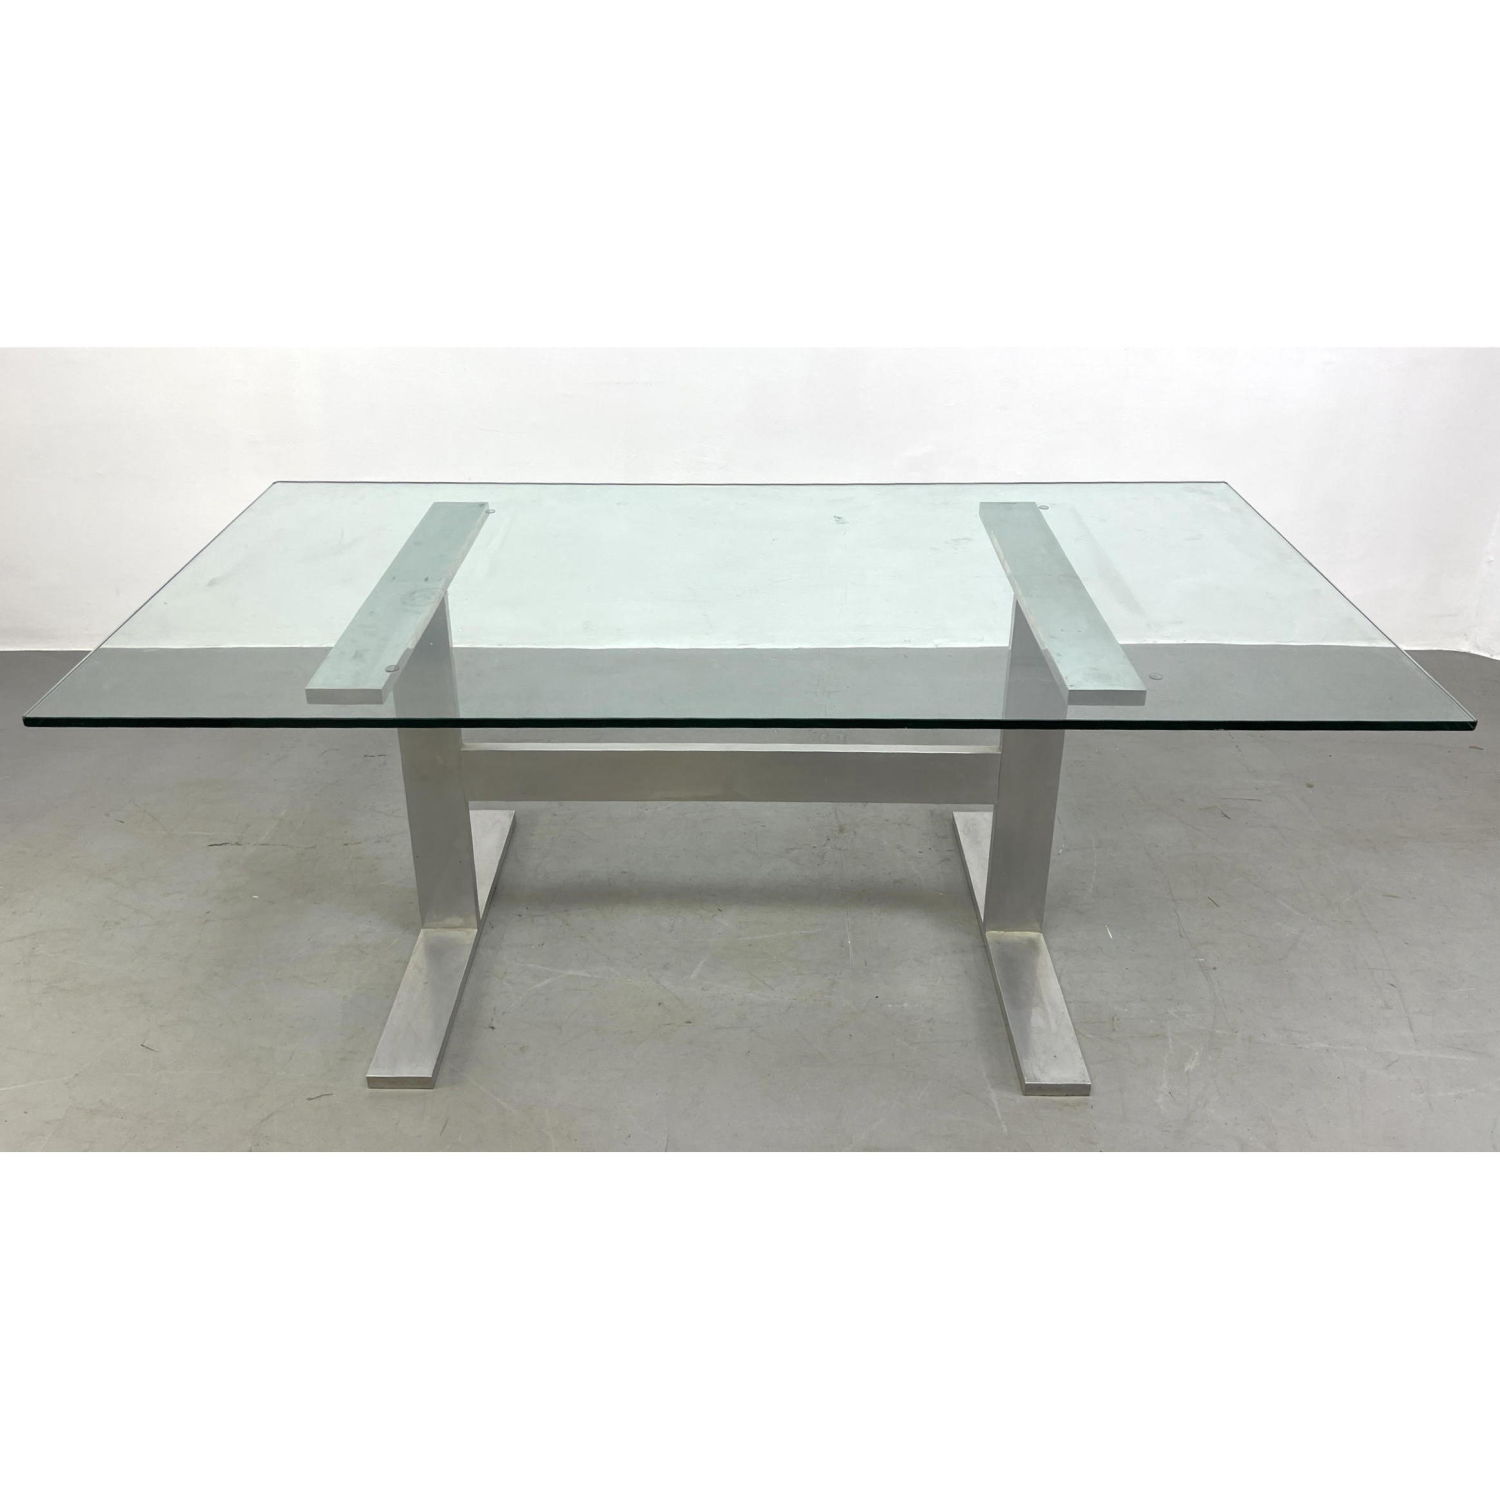 6' Glass Top Dining Table. Chrome